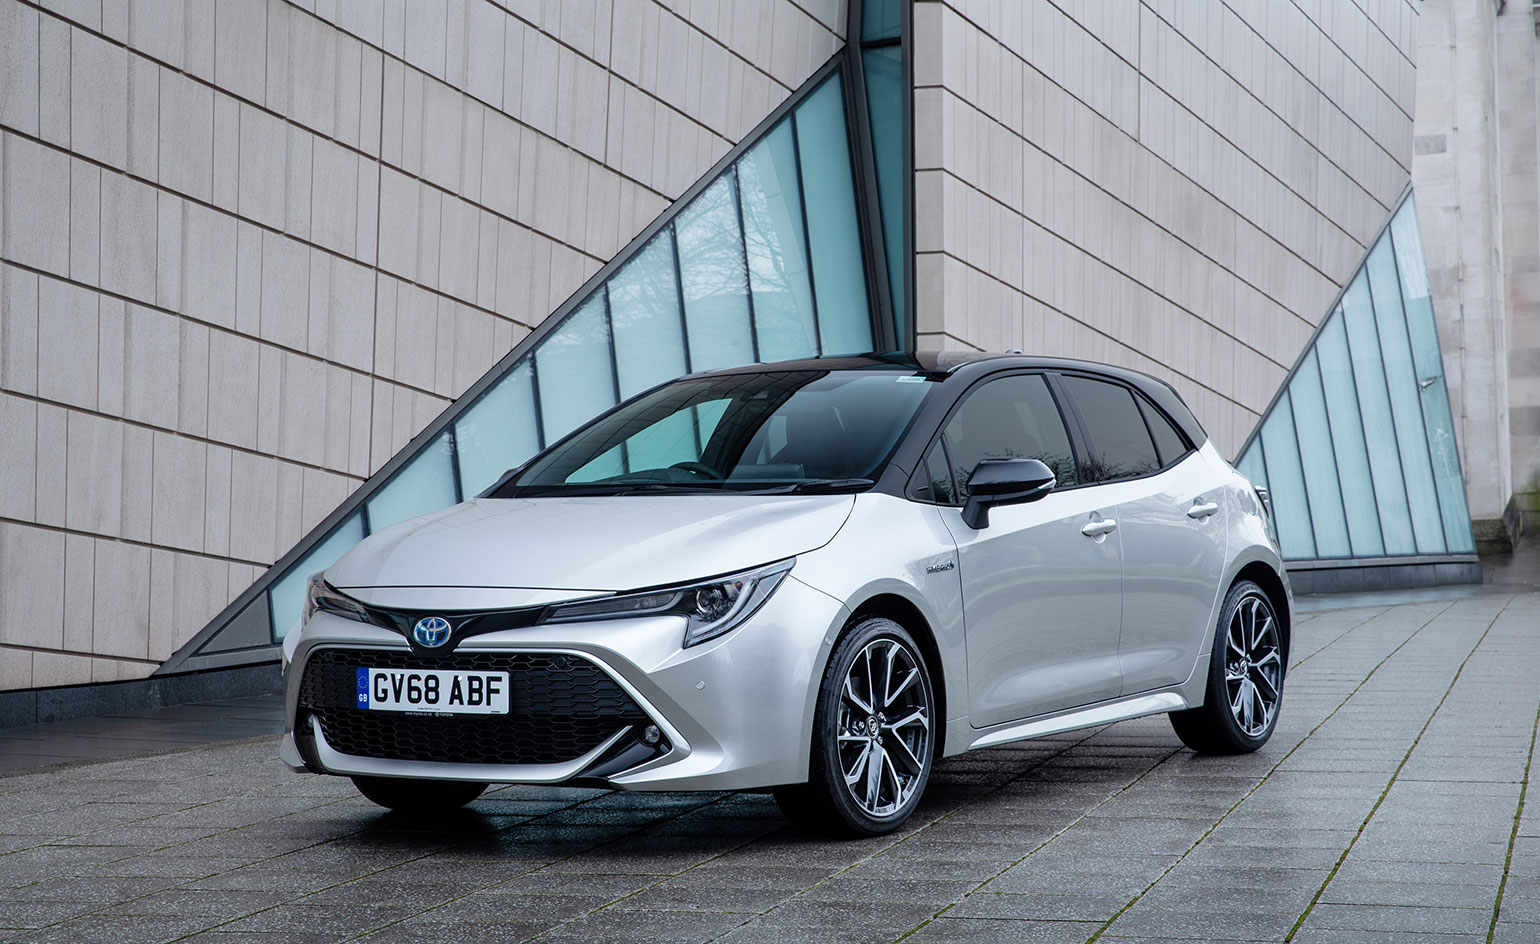 Toyota Corolla Review And Test Drive. Wallpaper*